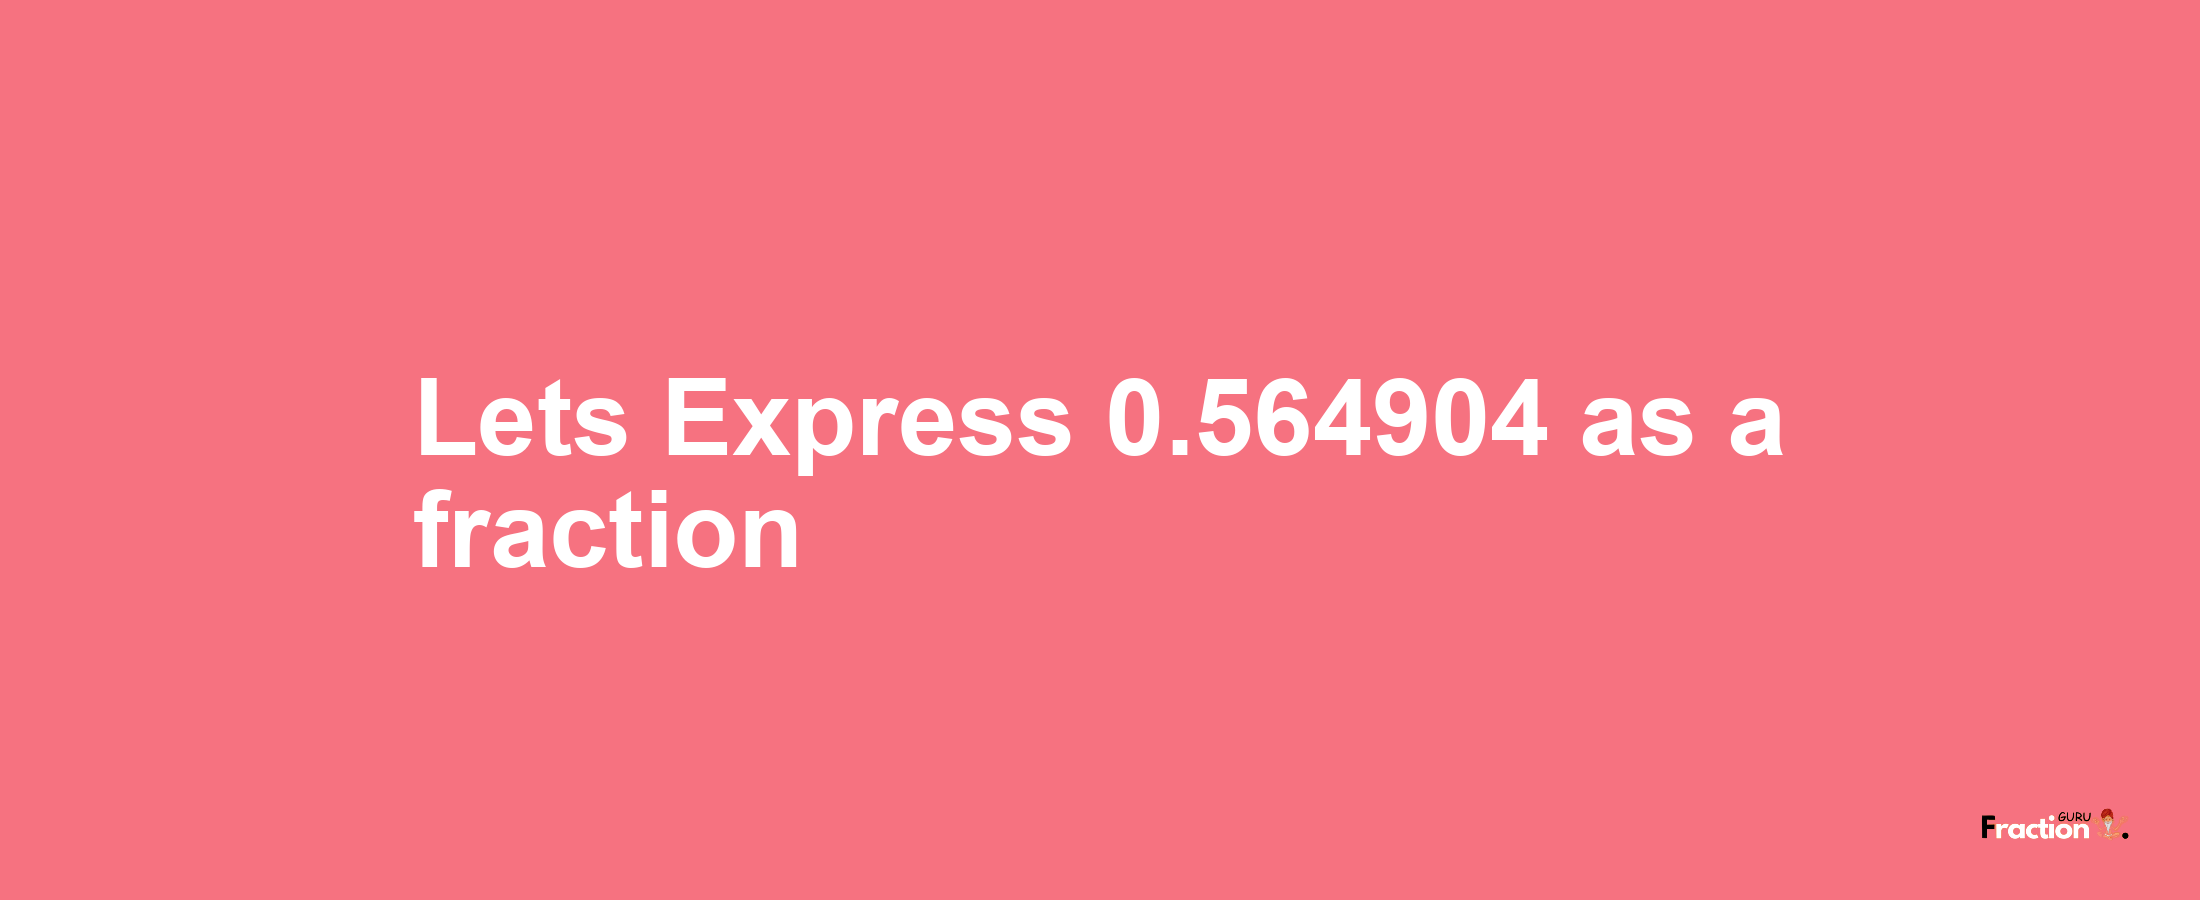 Lets Express 0.564904 as afraction